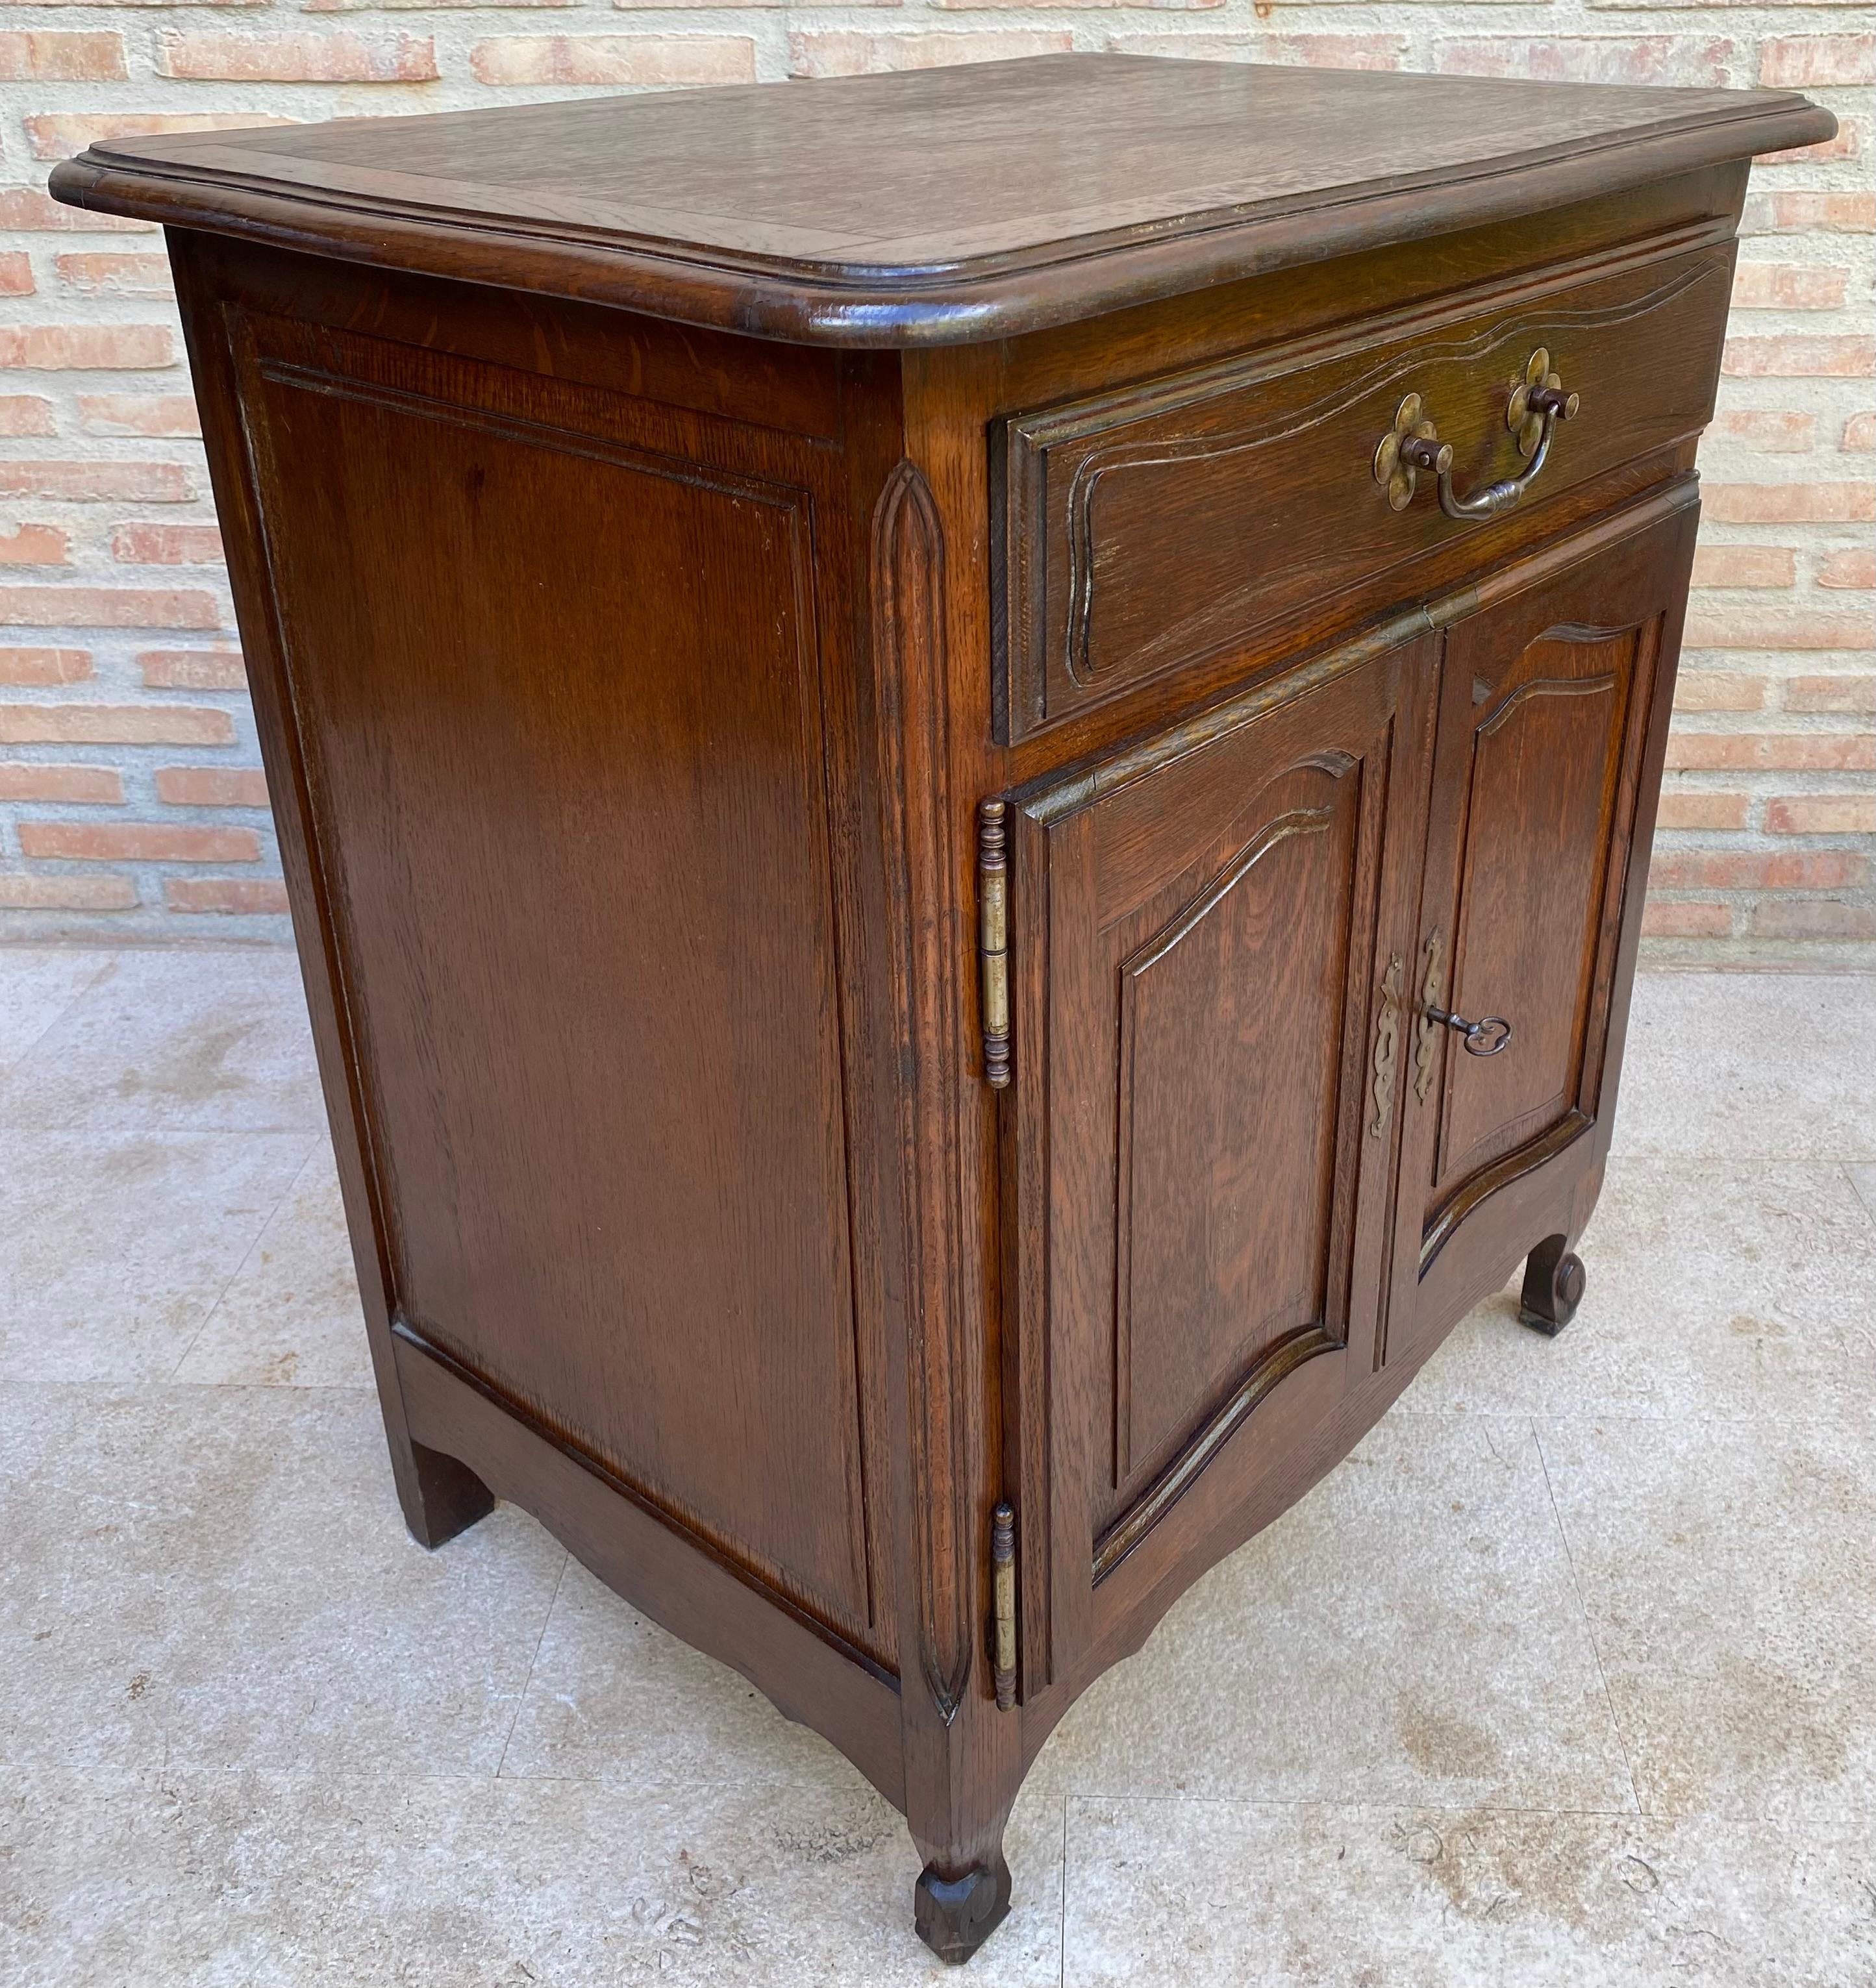 20th Century Mid-Century French Walnut Side Table with One Drawer and Double Door, 1950s For Sale